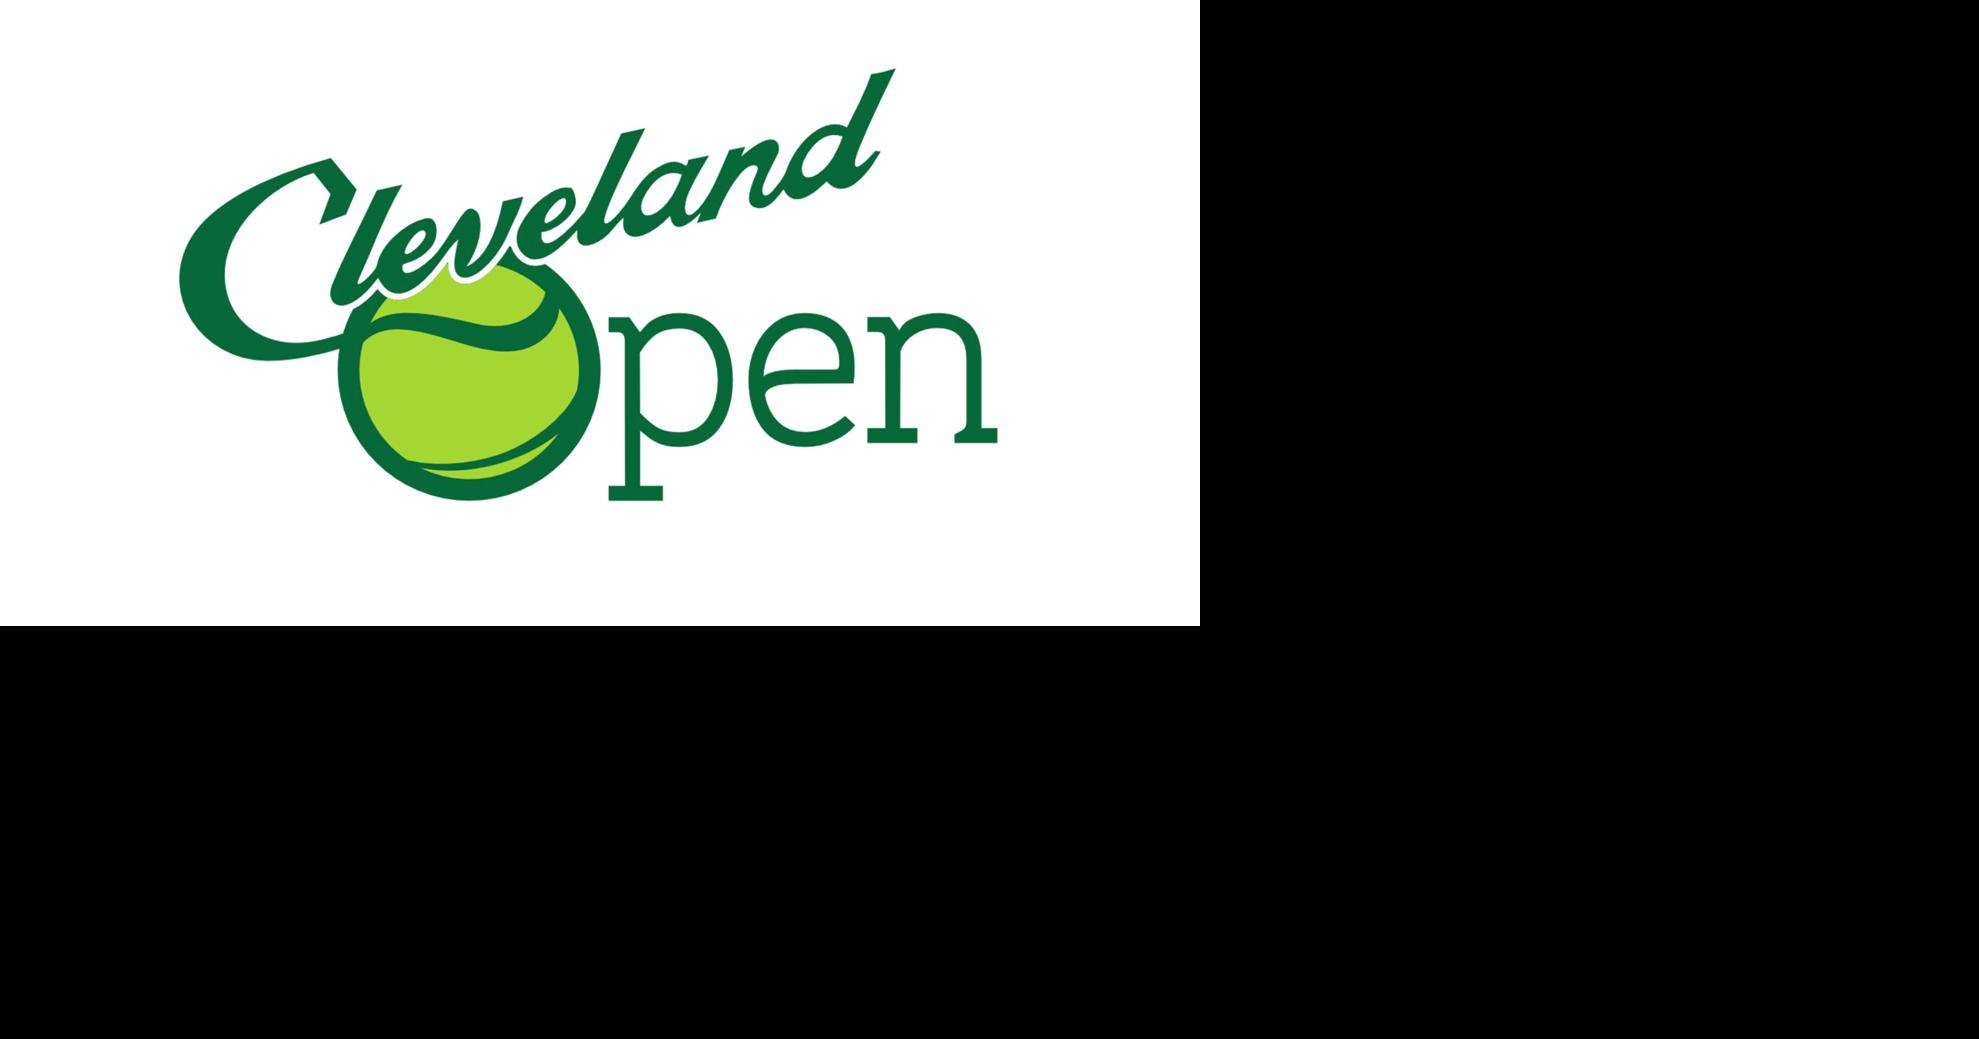 Cleveland Open returns to Cleveland Racquet Club for second year